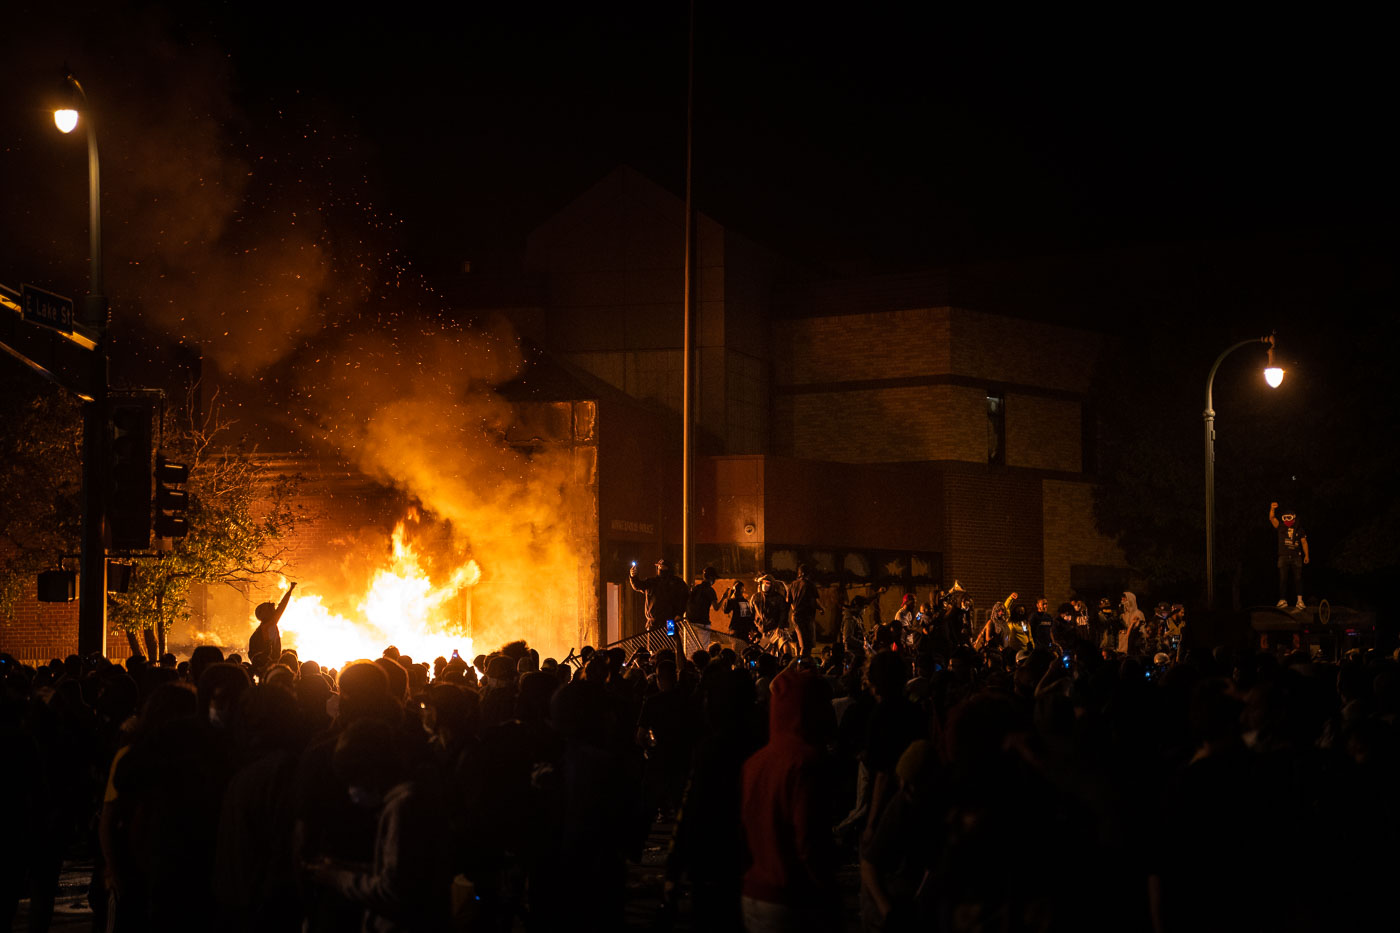 Protesters surround the burning police station